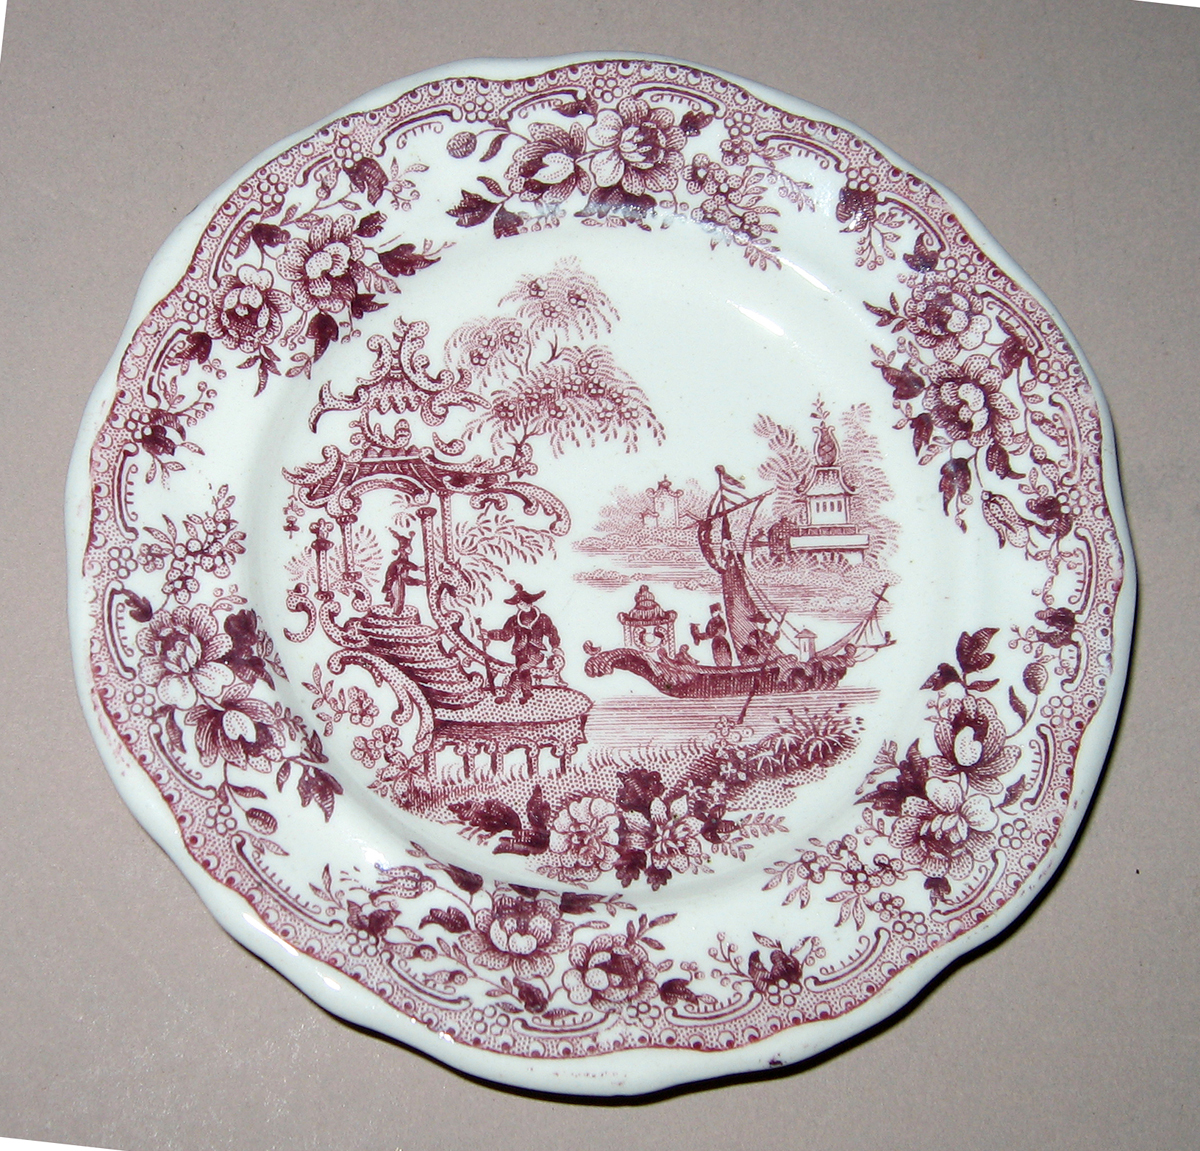 1955.0136.176 Miniature plate with chinoiserie printed scene